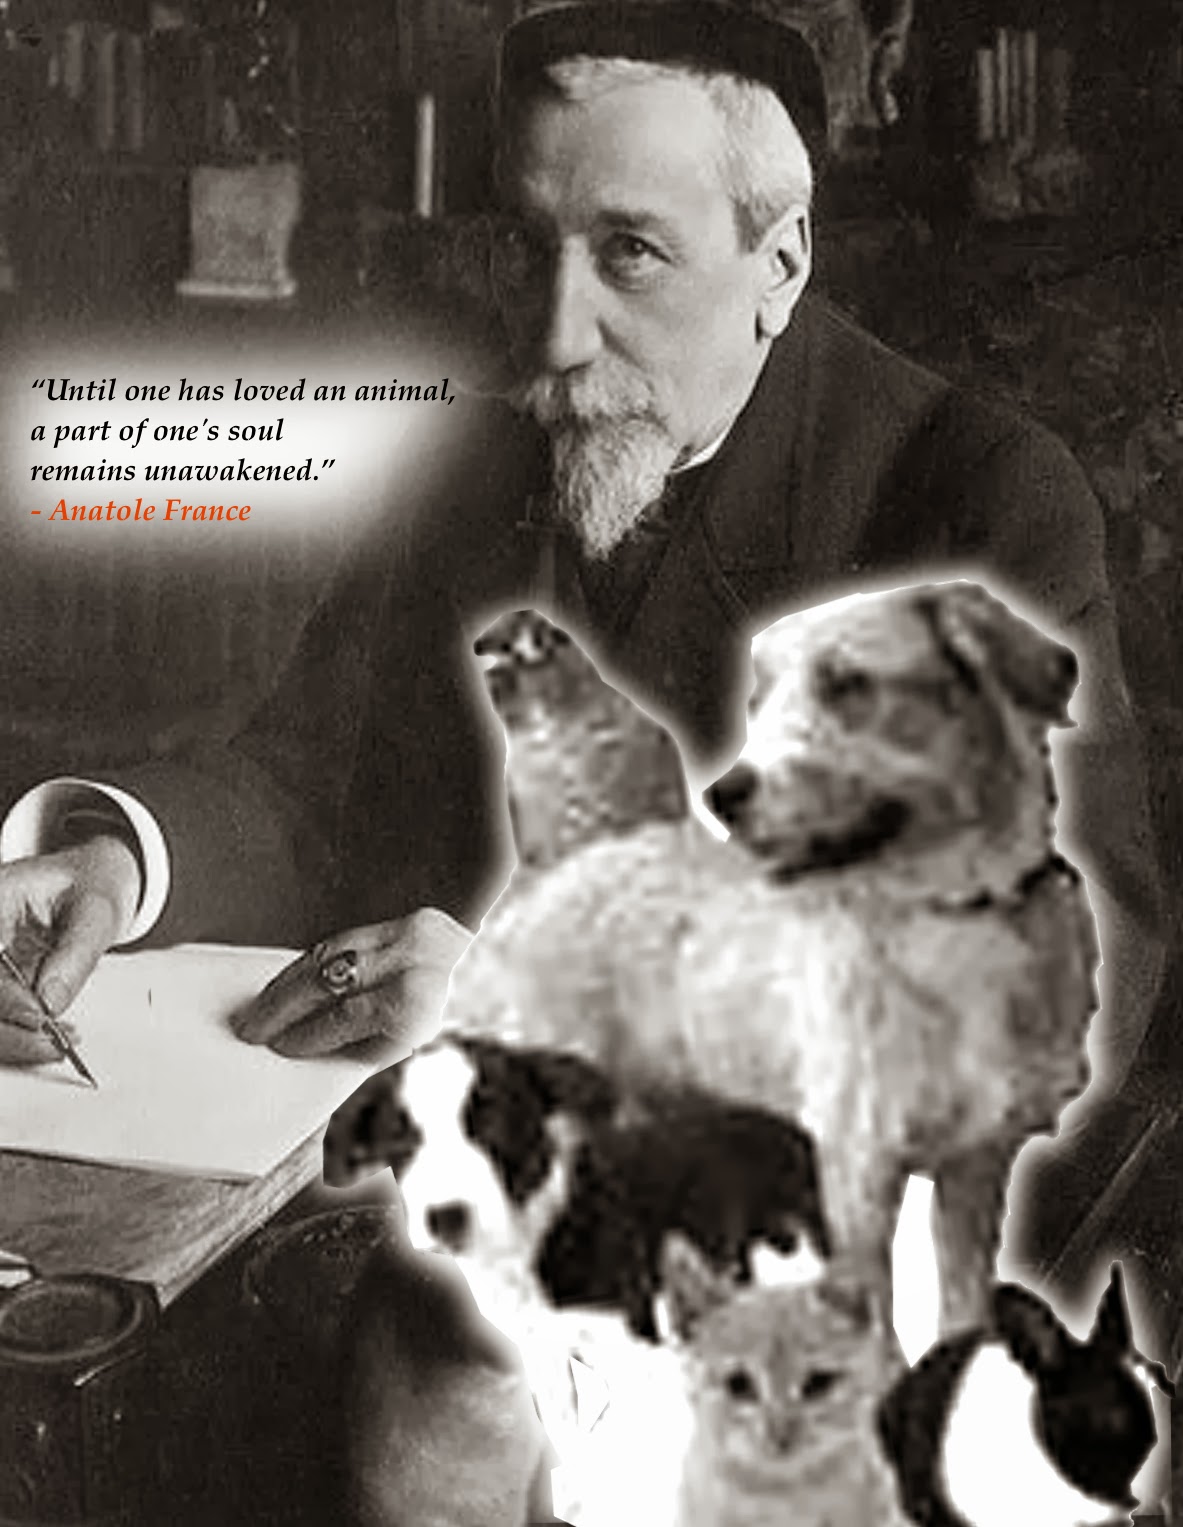 Today s Quote on Animals “Until one has loved an animal a part of one s soul remains unawakened ” –Anatole France